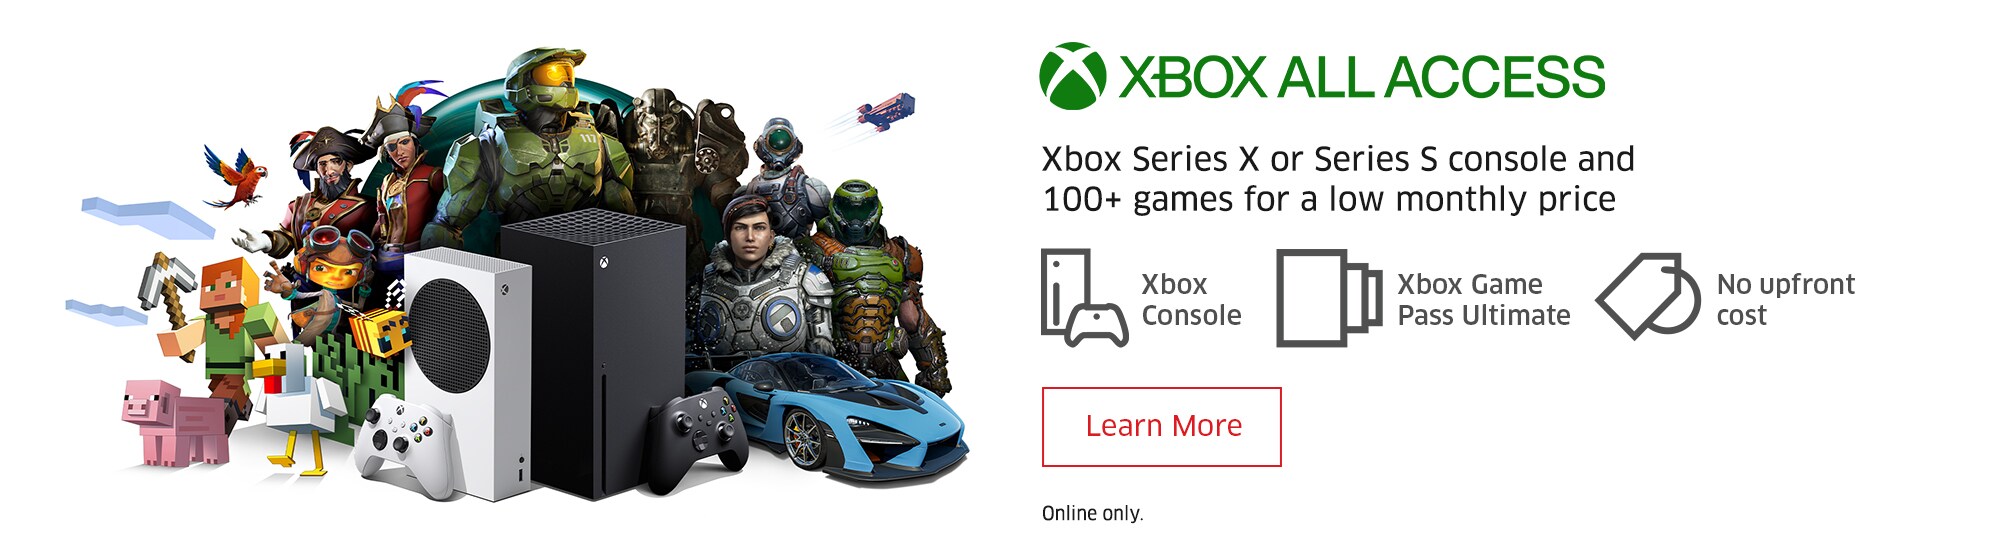 Xbox Series X or Series S console and 100+ games for a low monthly price  Learn More  Online only.